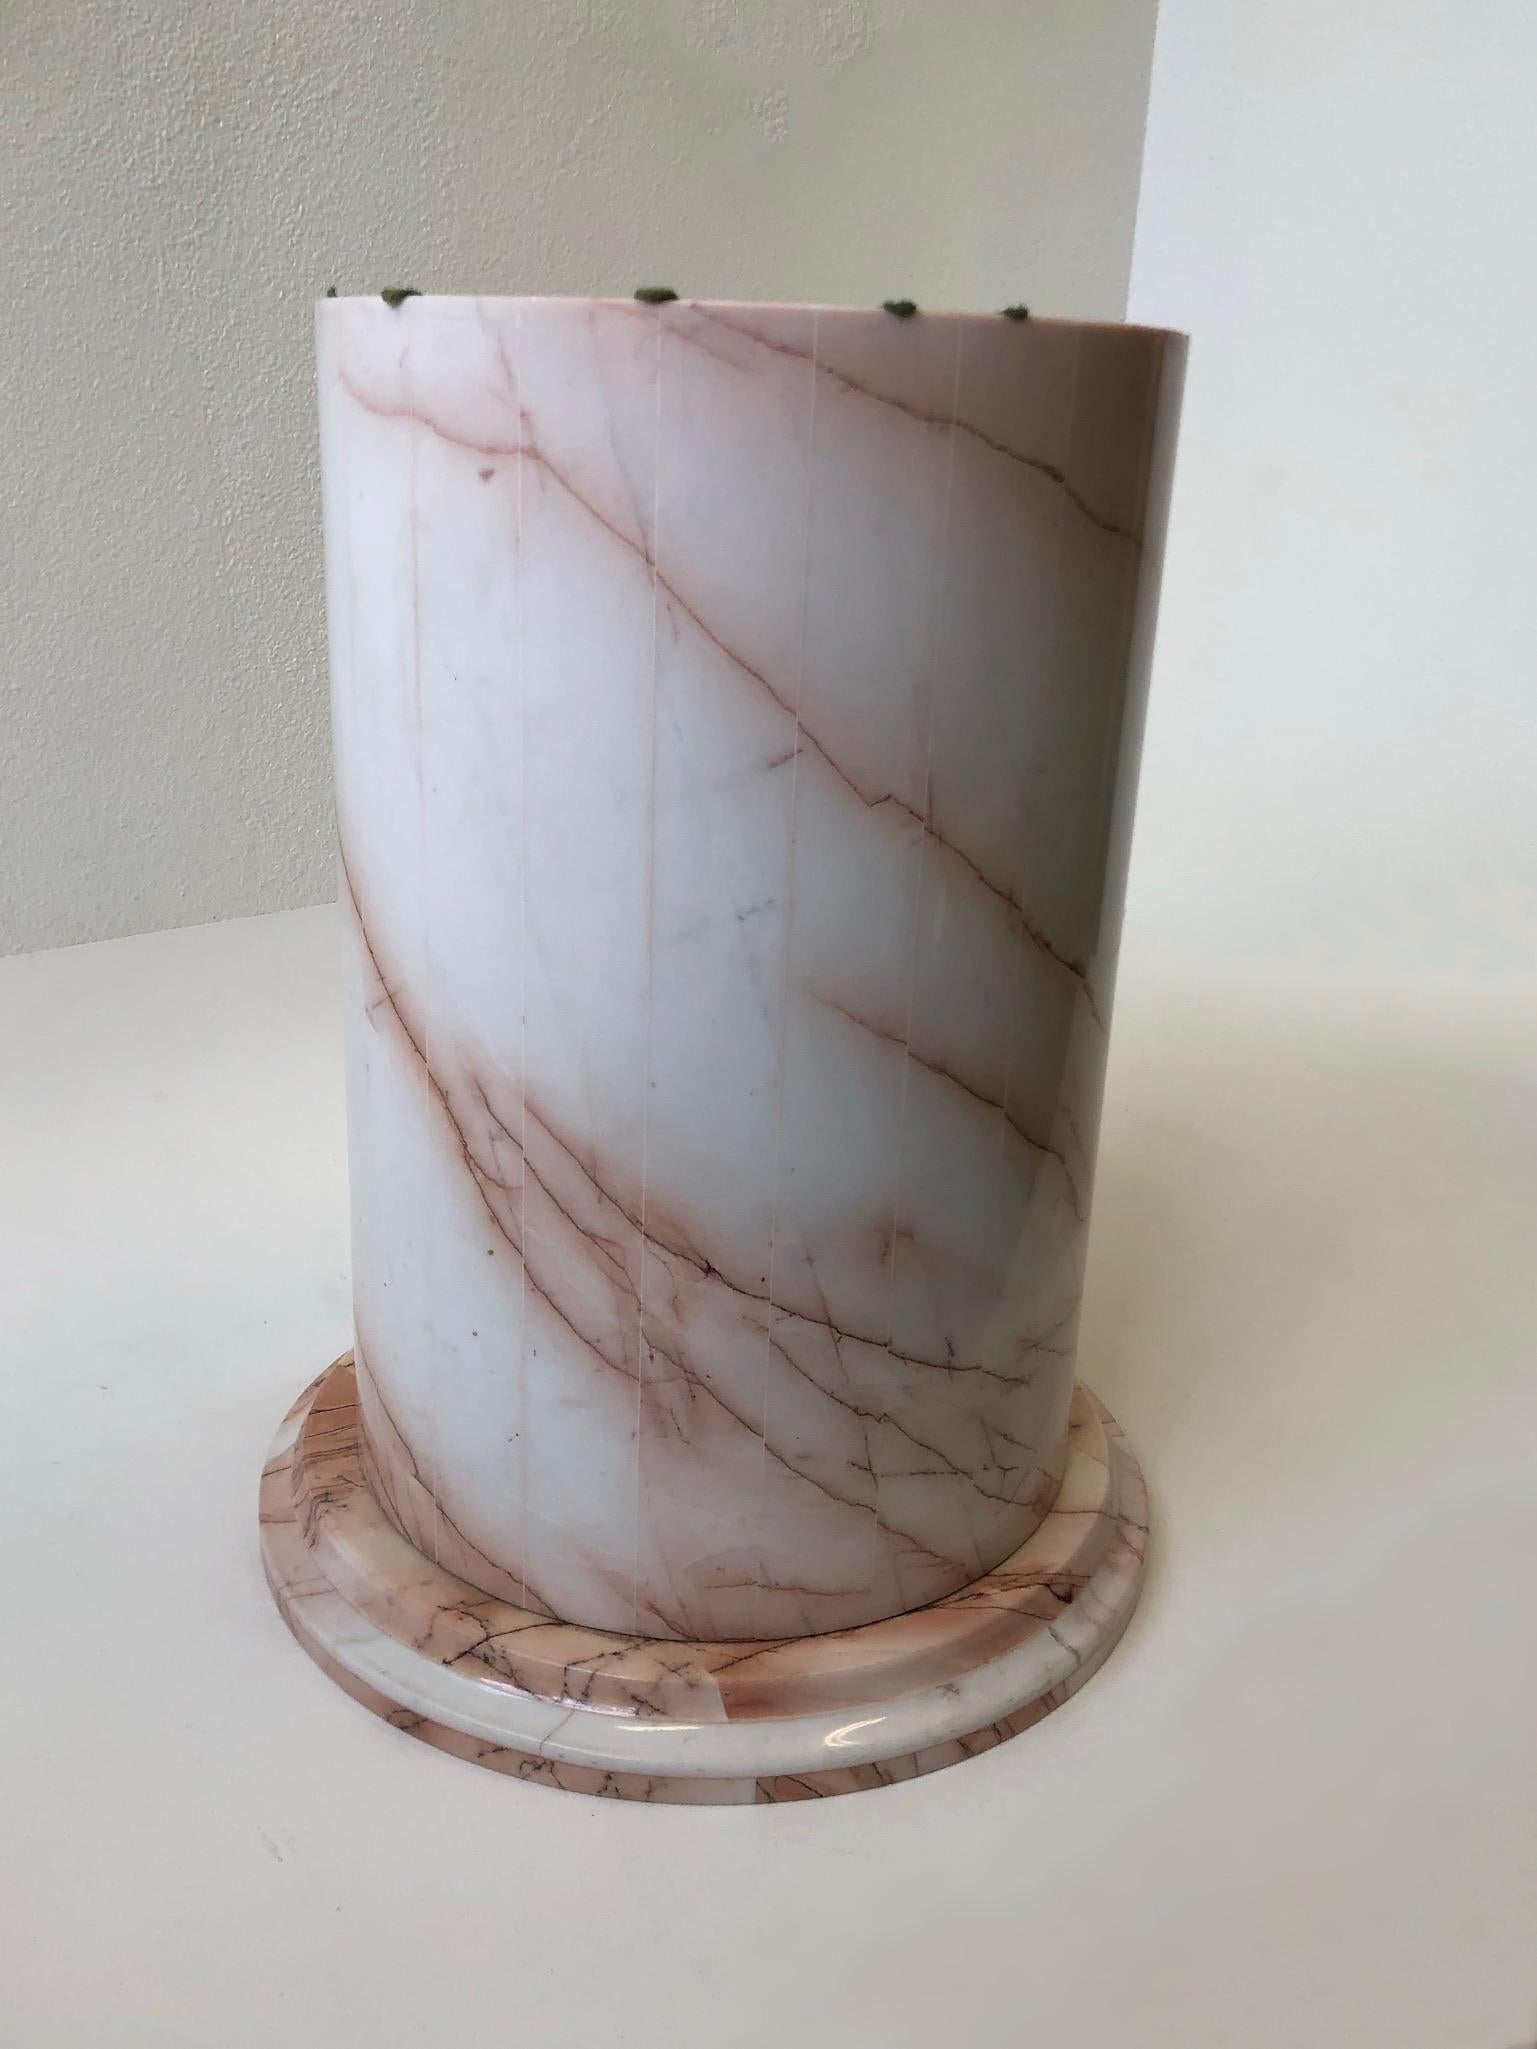 pink marble dining table